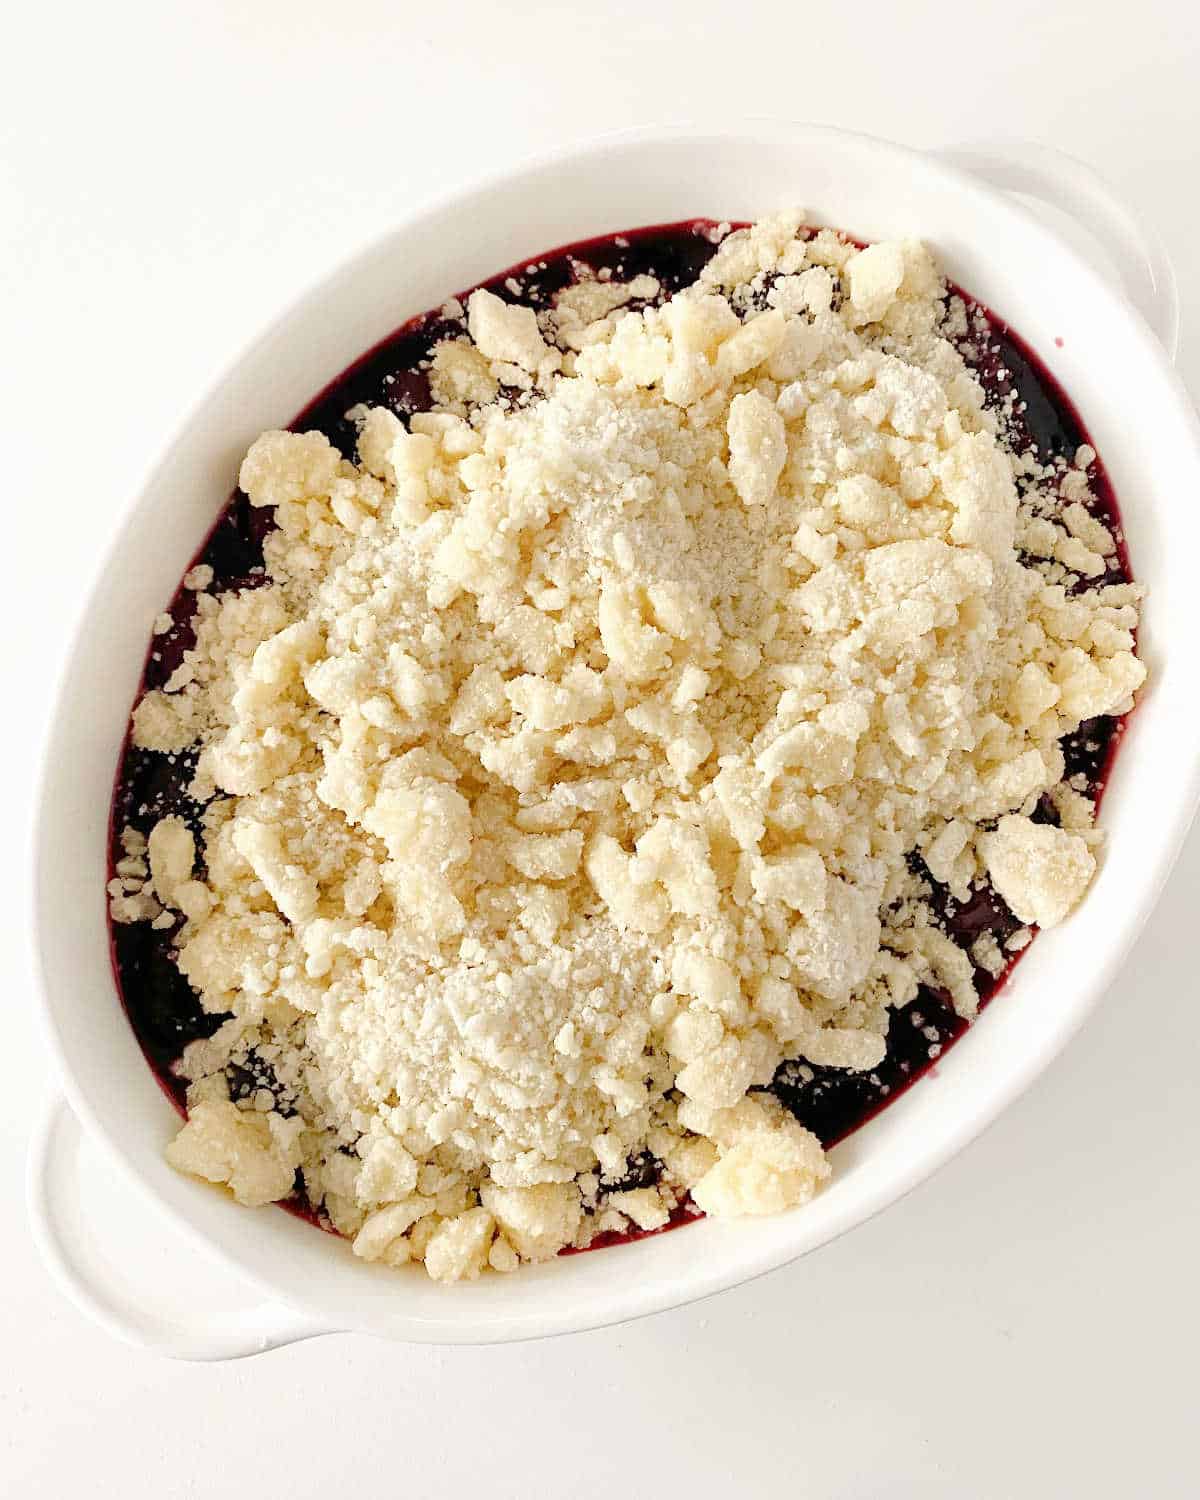 Unbaked cherry dump cake in oval white dish on white surface, top view.